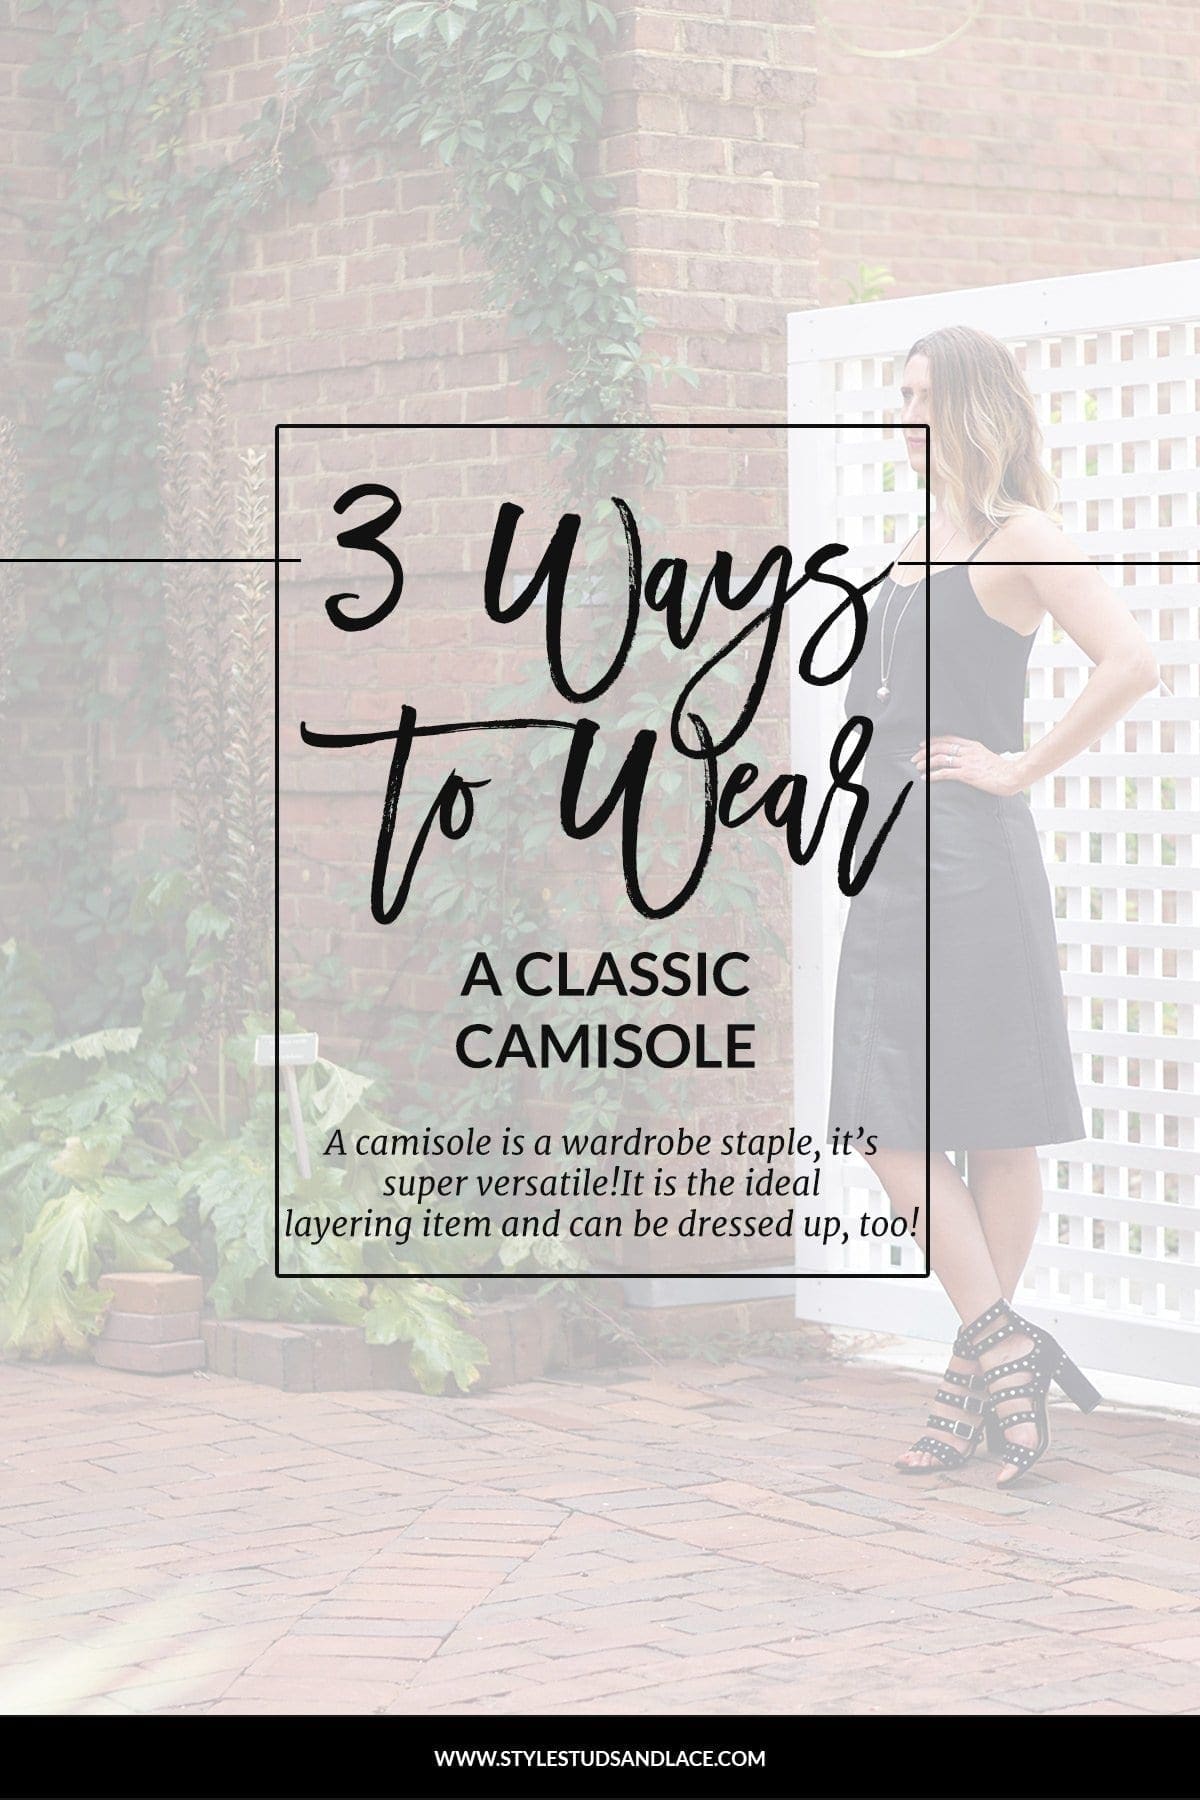 Three simple ways to breathe new life into your camisole | A vest is a wardrobe staple, it’s versatile and can be worn to work, at the weekend, on a night out and is perfect layering.